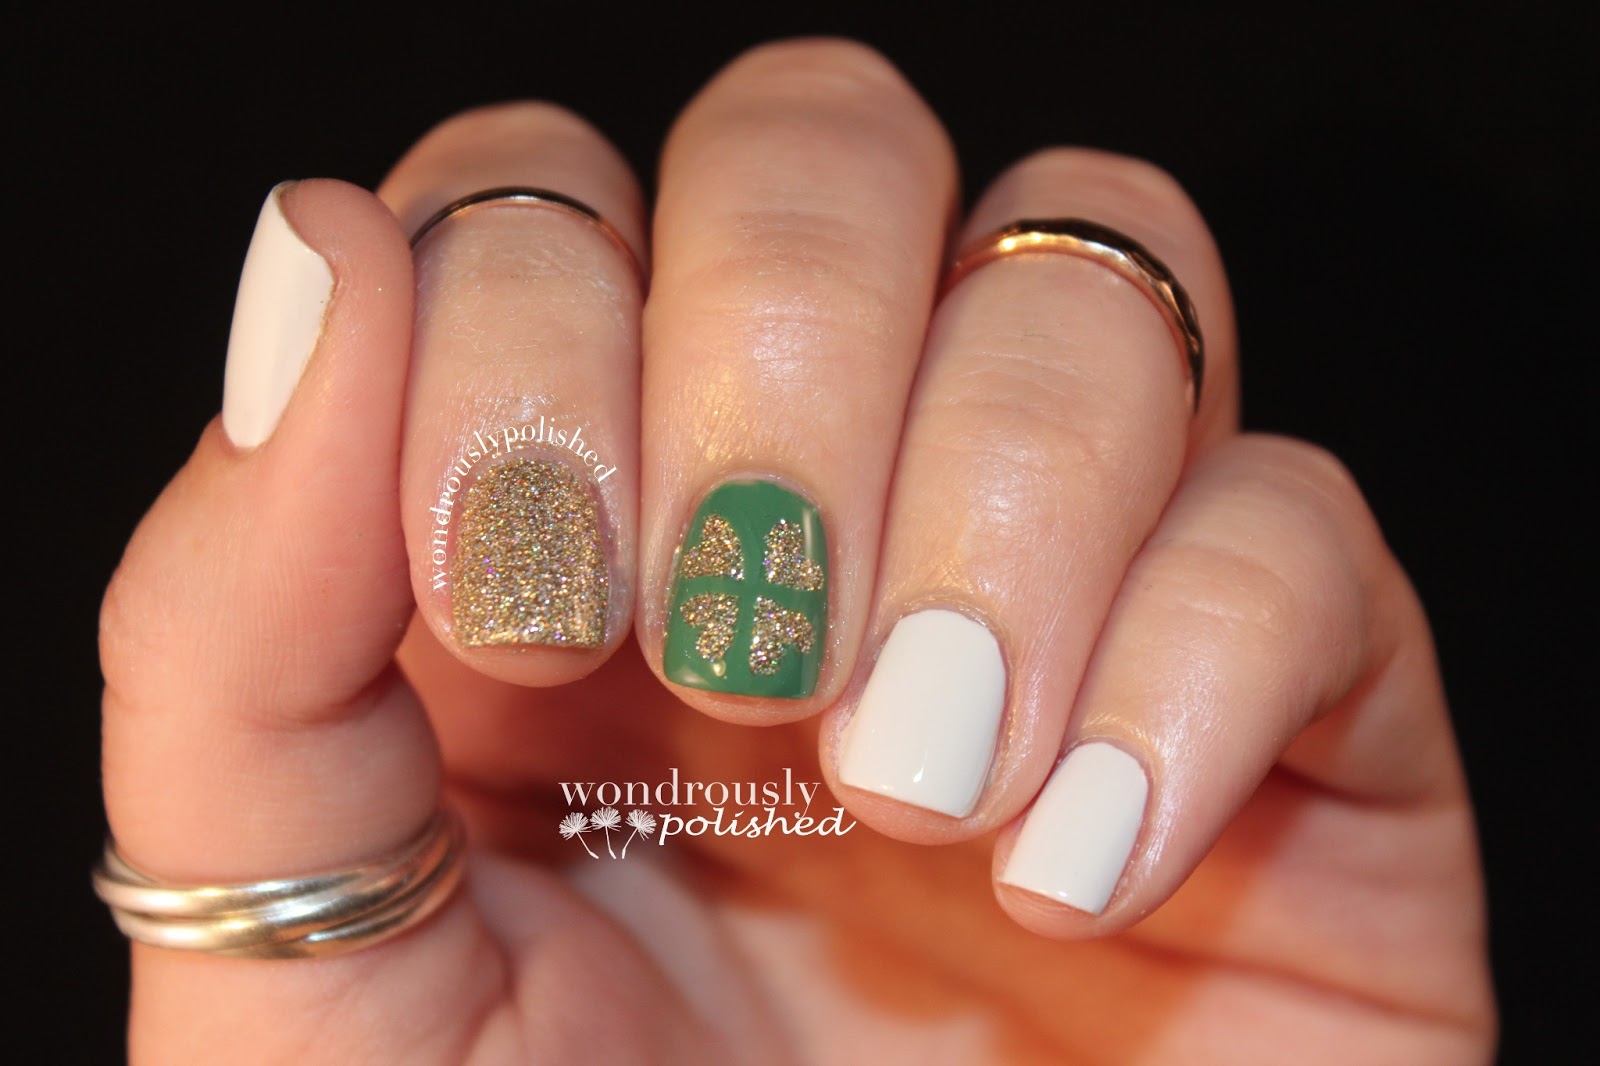 6. "Nail Art That Tells a Story: From Childhood Memories to Present Day" - wide 4